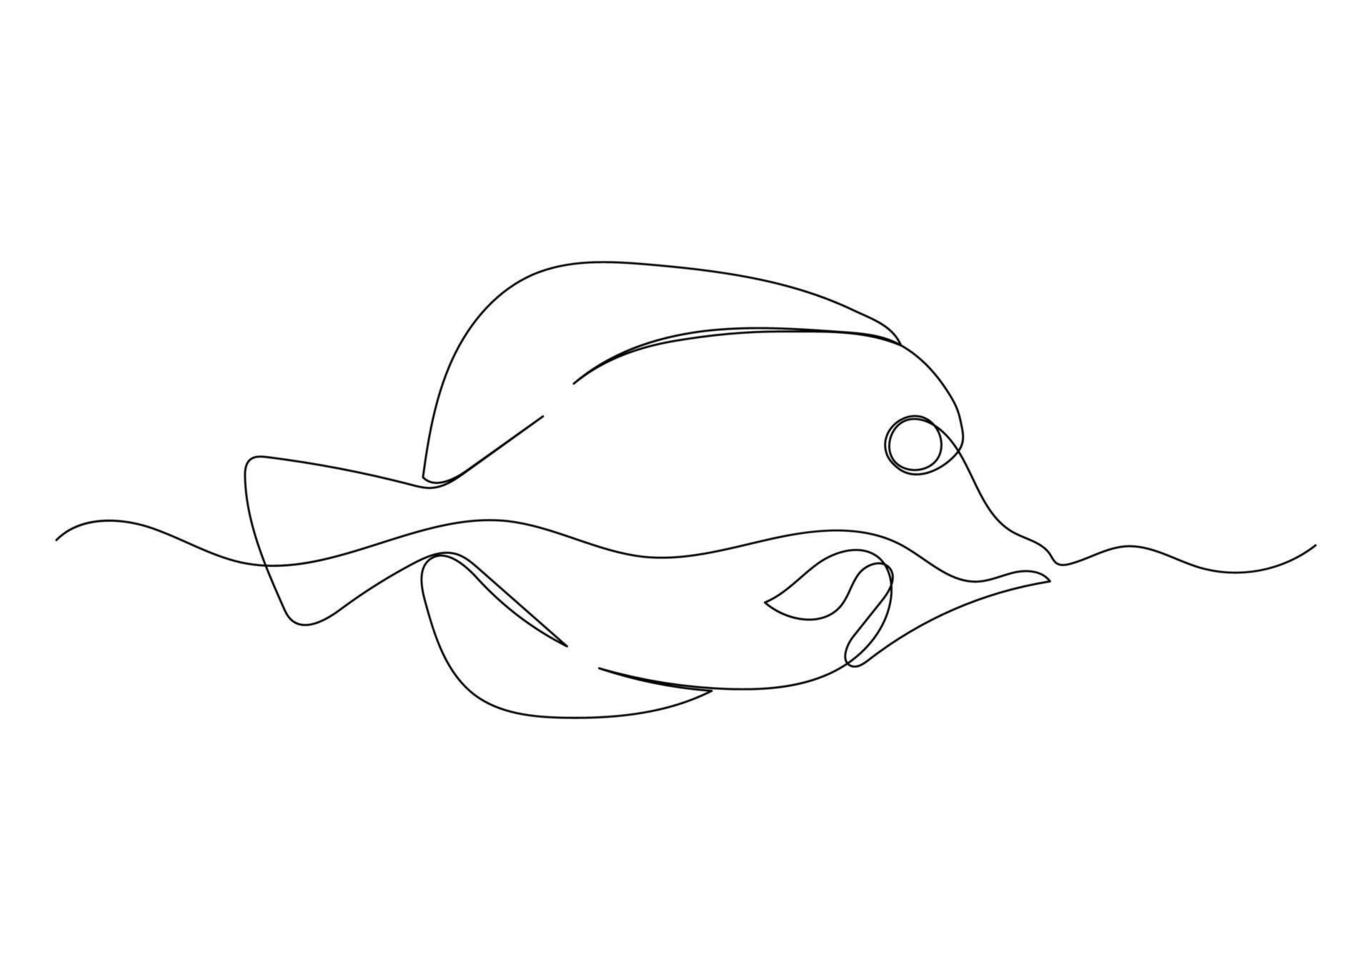 Continuous line drawing of fish with the ocean. Minimalism art. vector